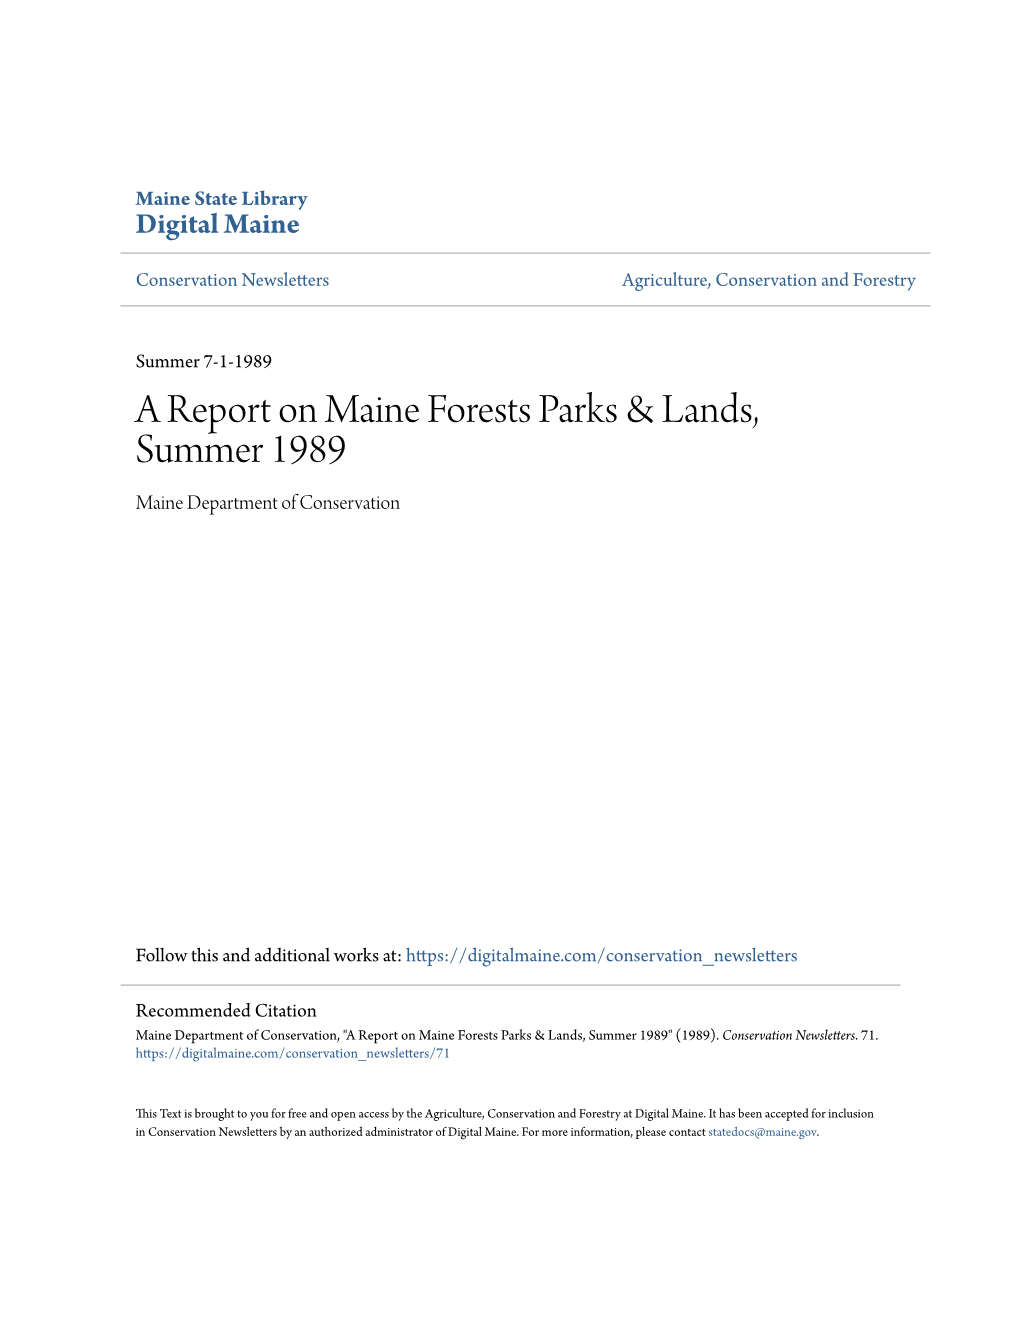 A Report on Maine Forests Parks & Lands, Summer 1989